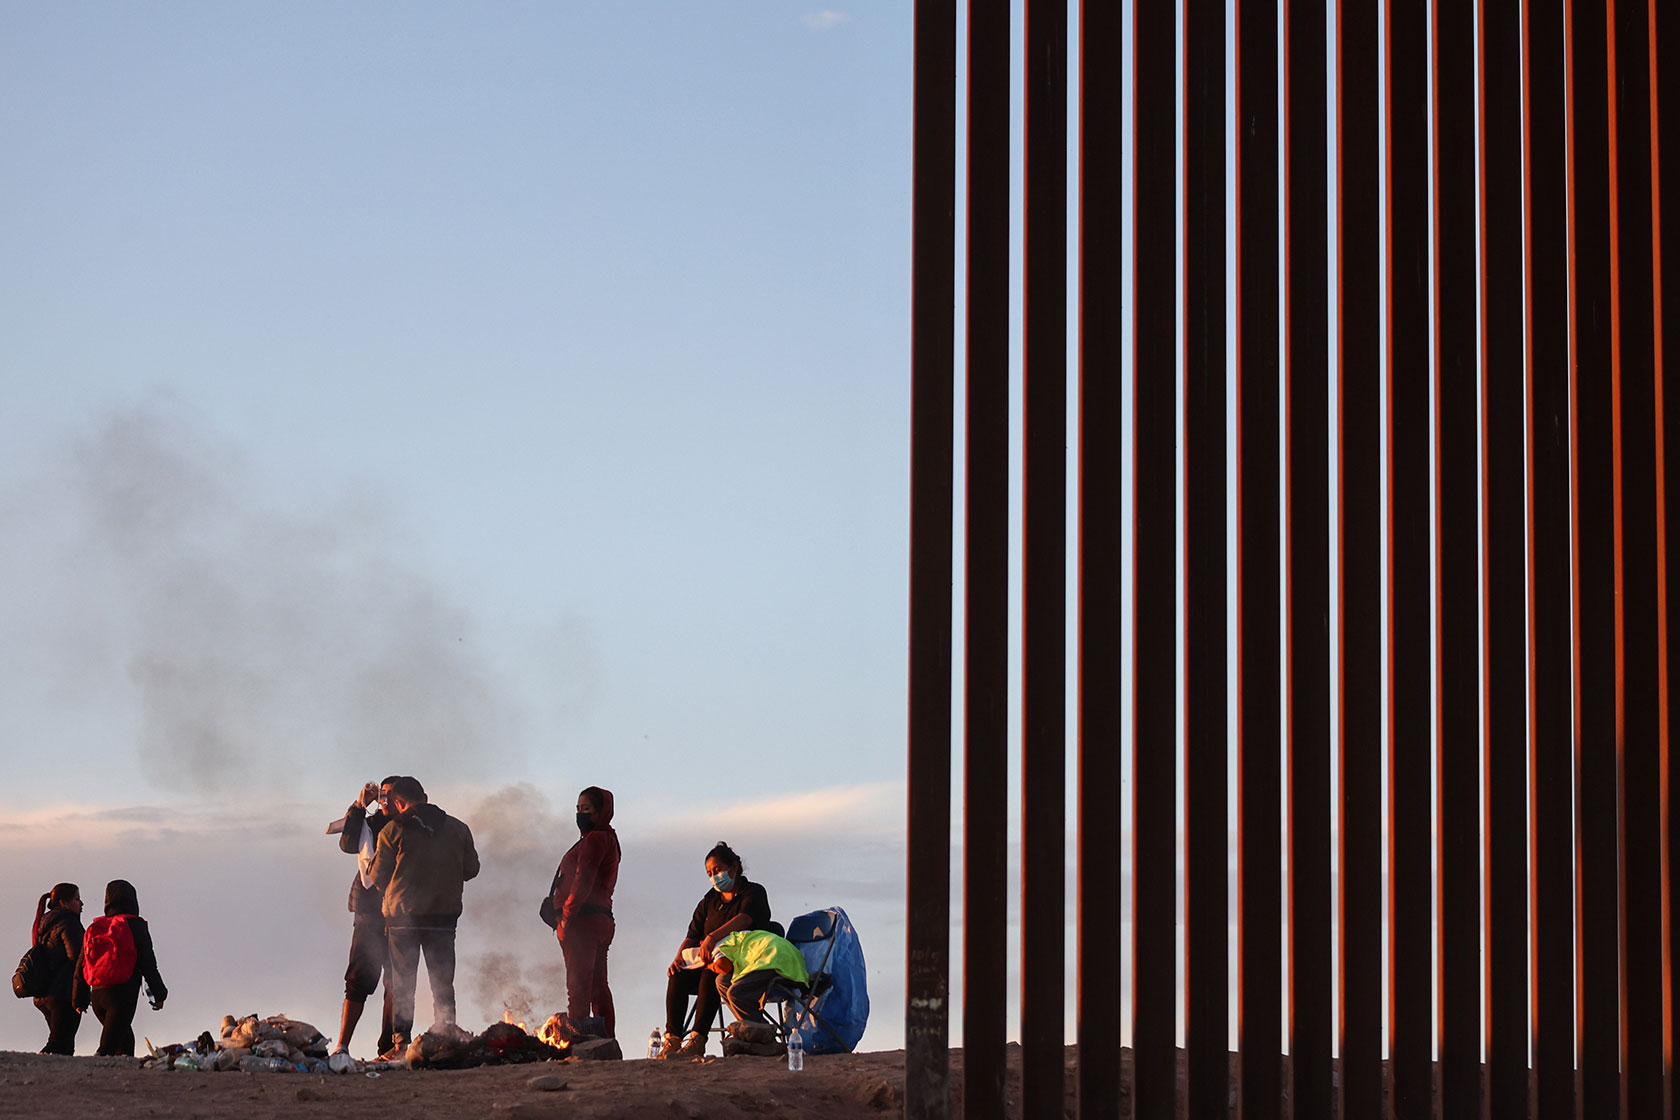 A group of immigrants warms themselves near the U.S.-Mexico border.